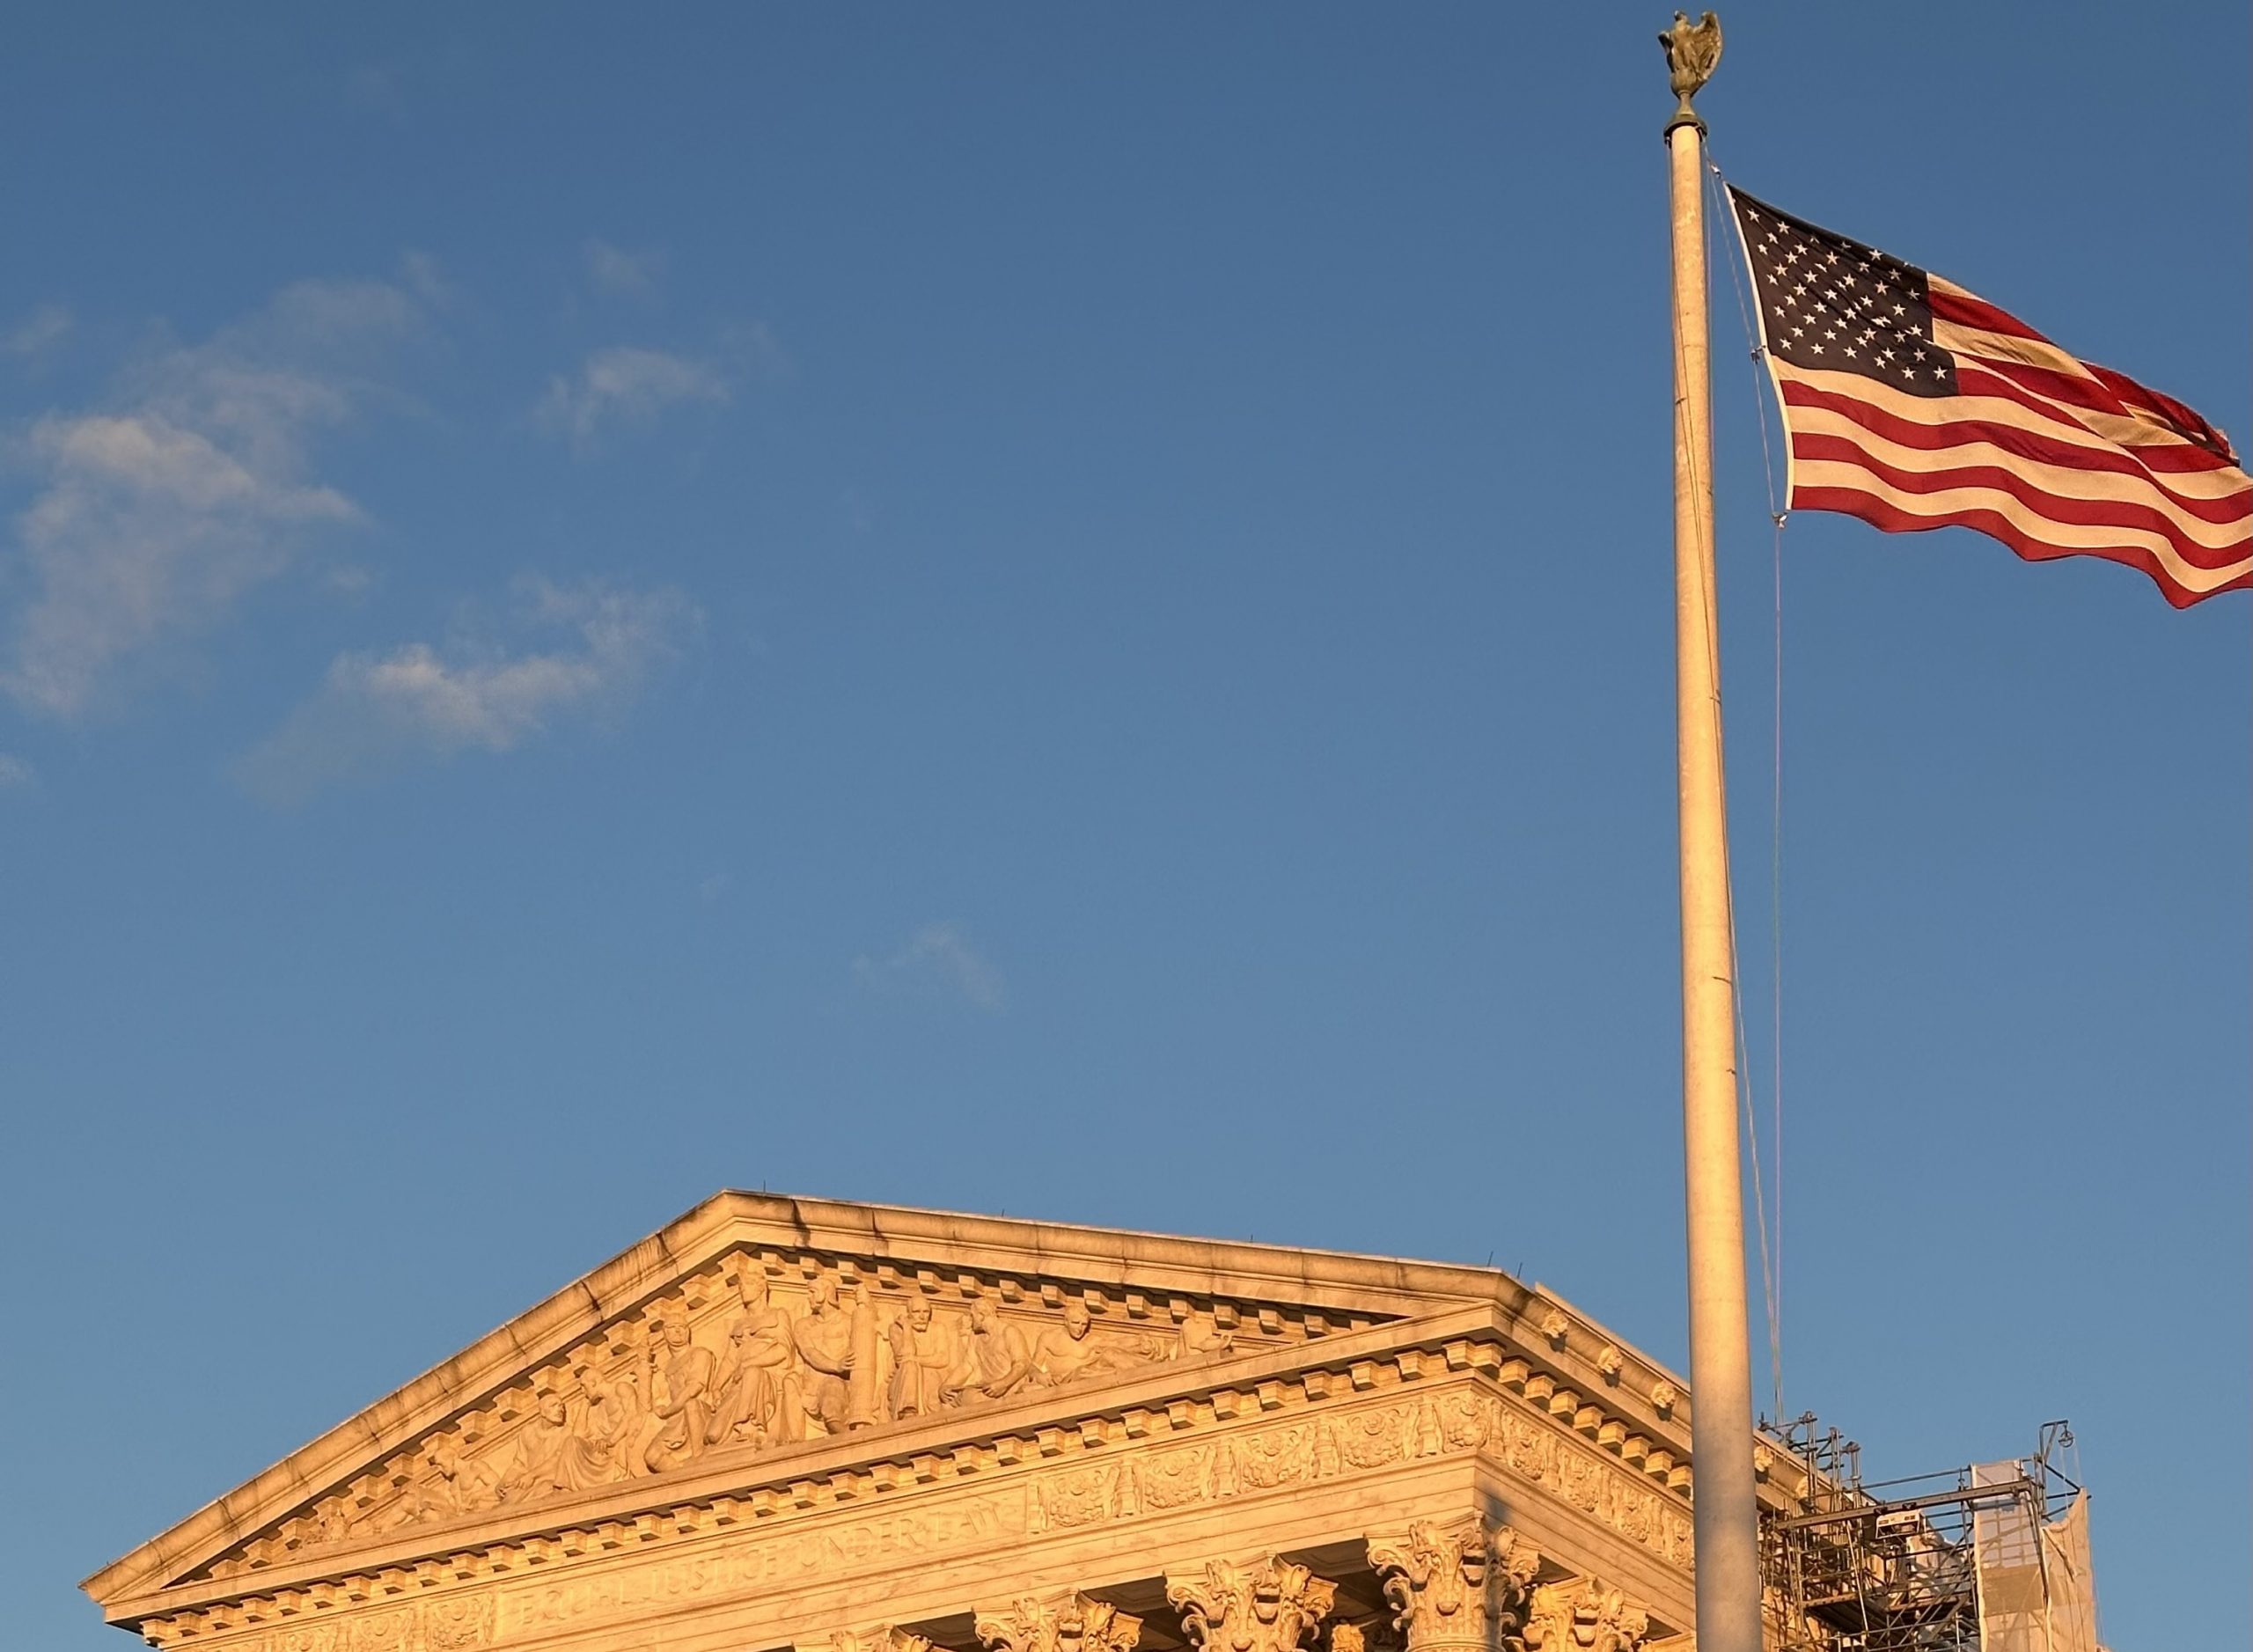 An American flag flies over the Supreme Court